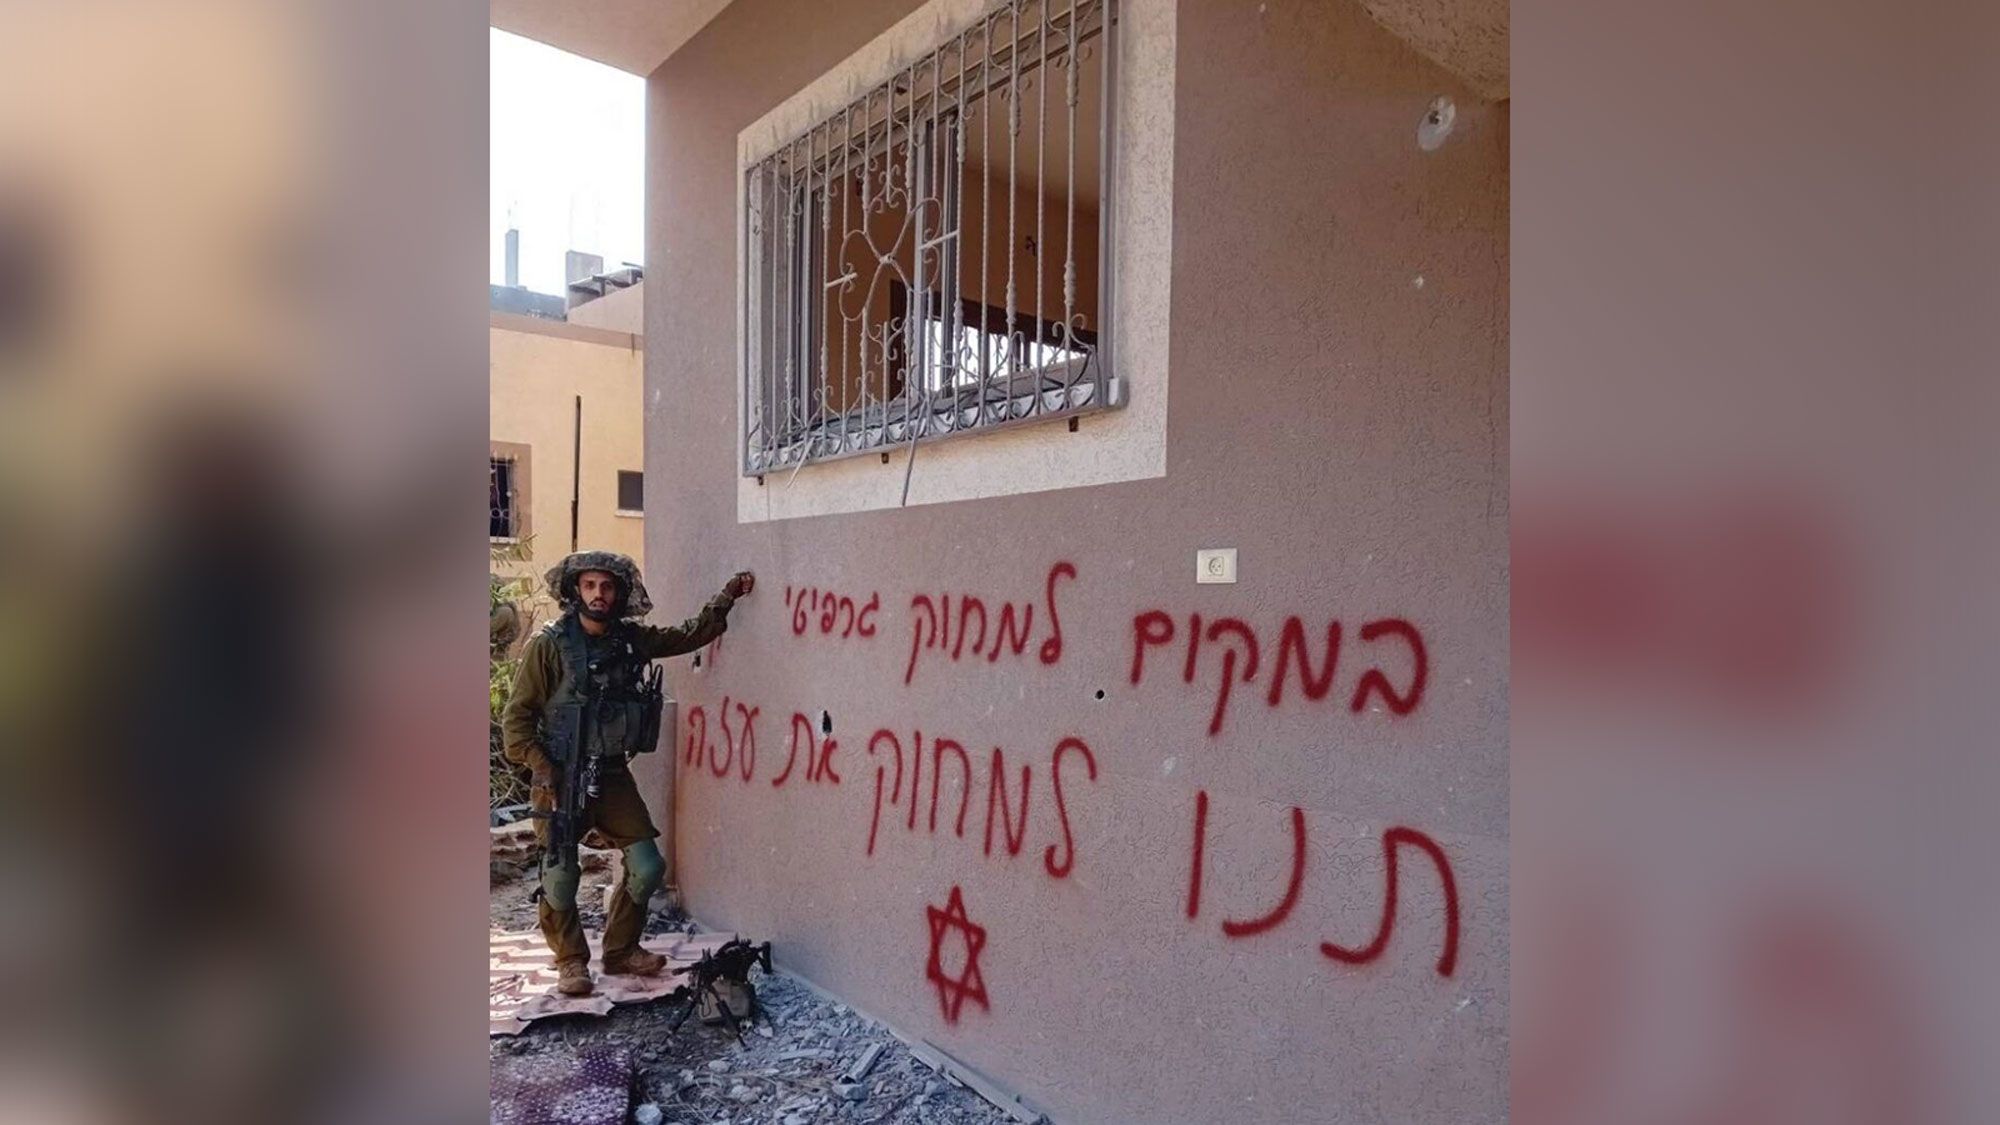 Videos show Israeli soldiers in Gaza burning food, vandalizing a shop and  ransacking private homes